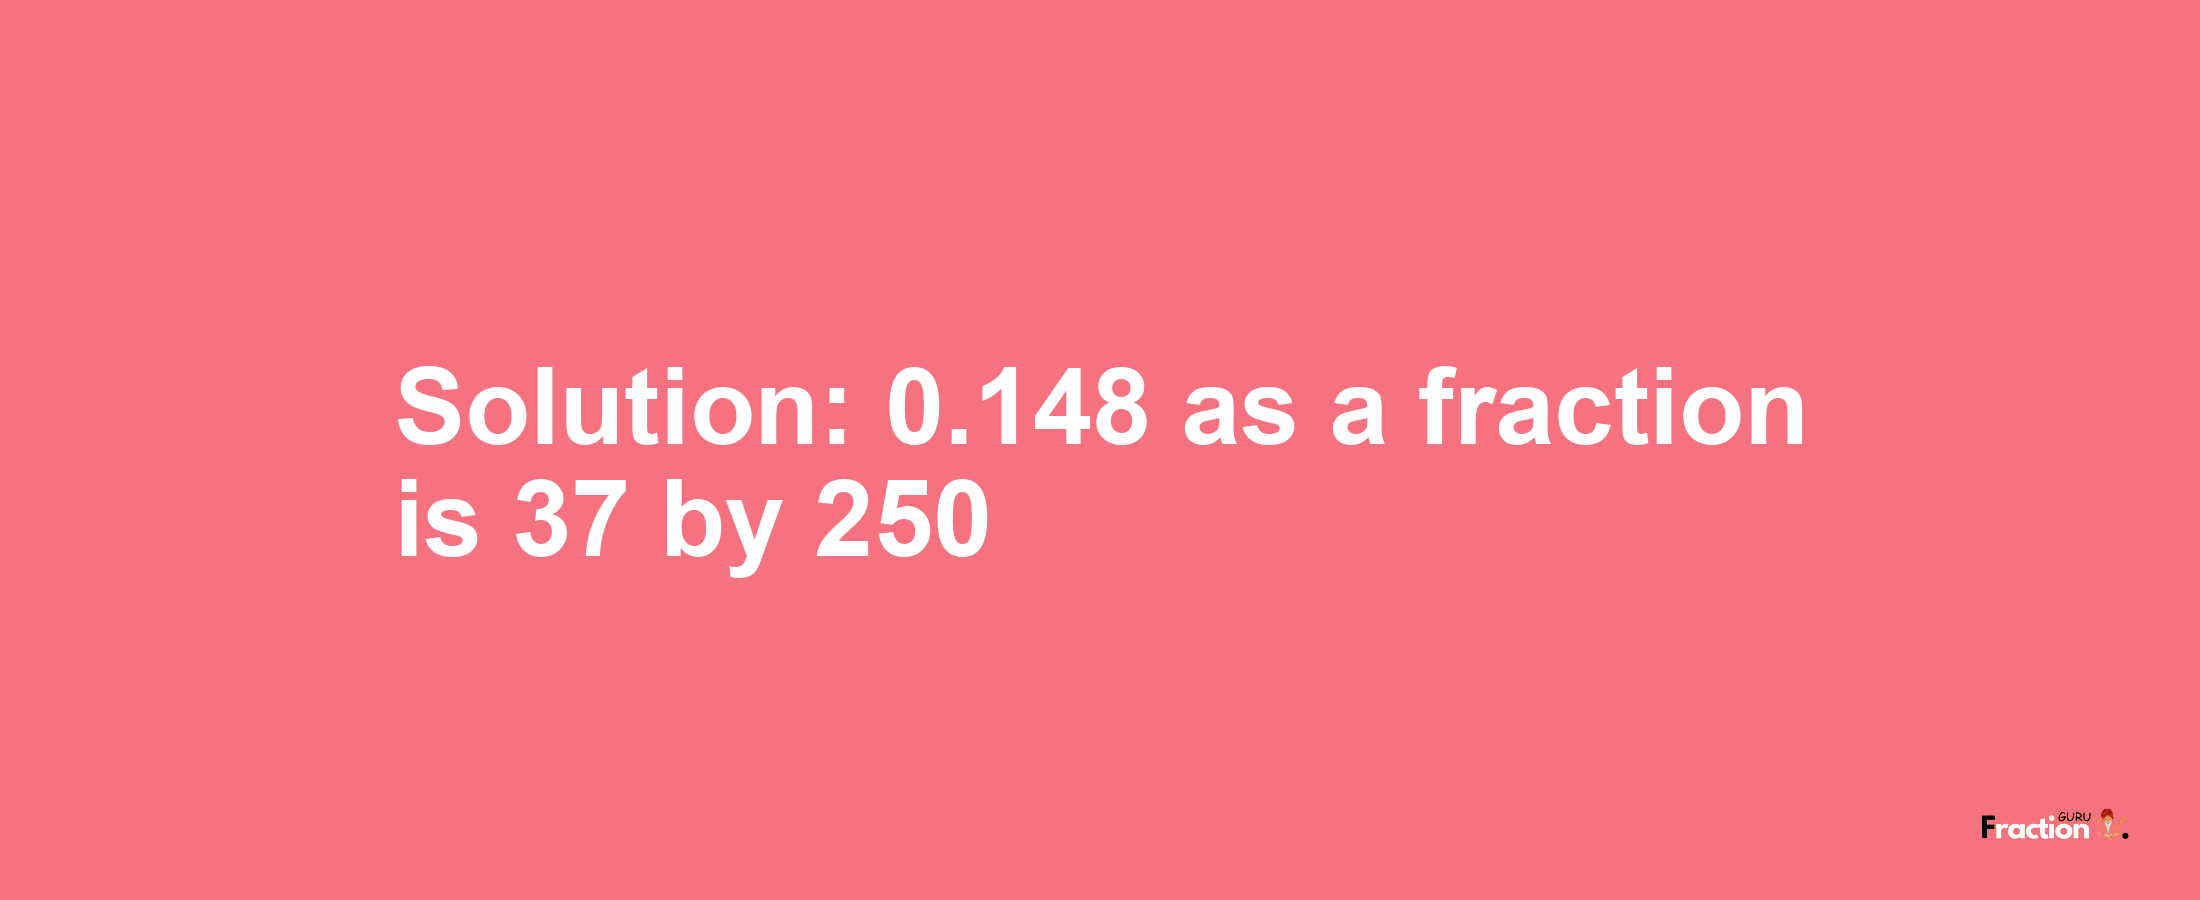 Solution:0.148 as a fraction is 37/250